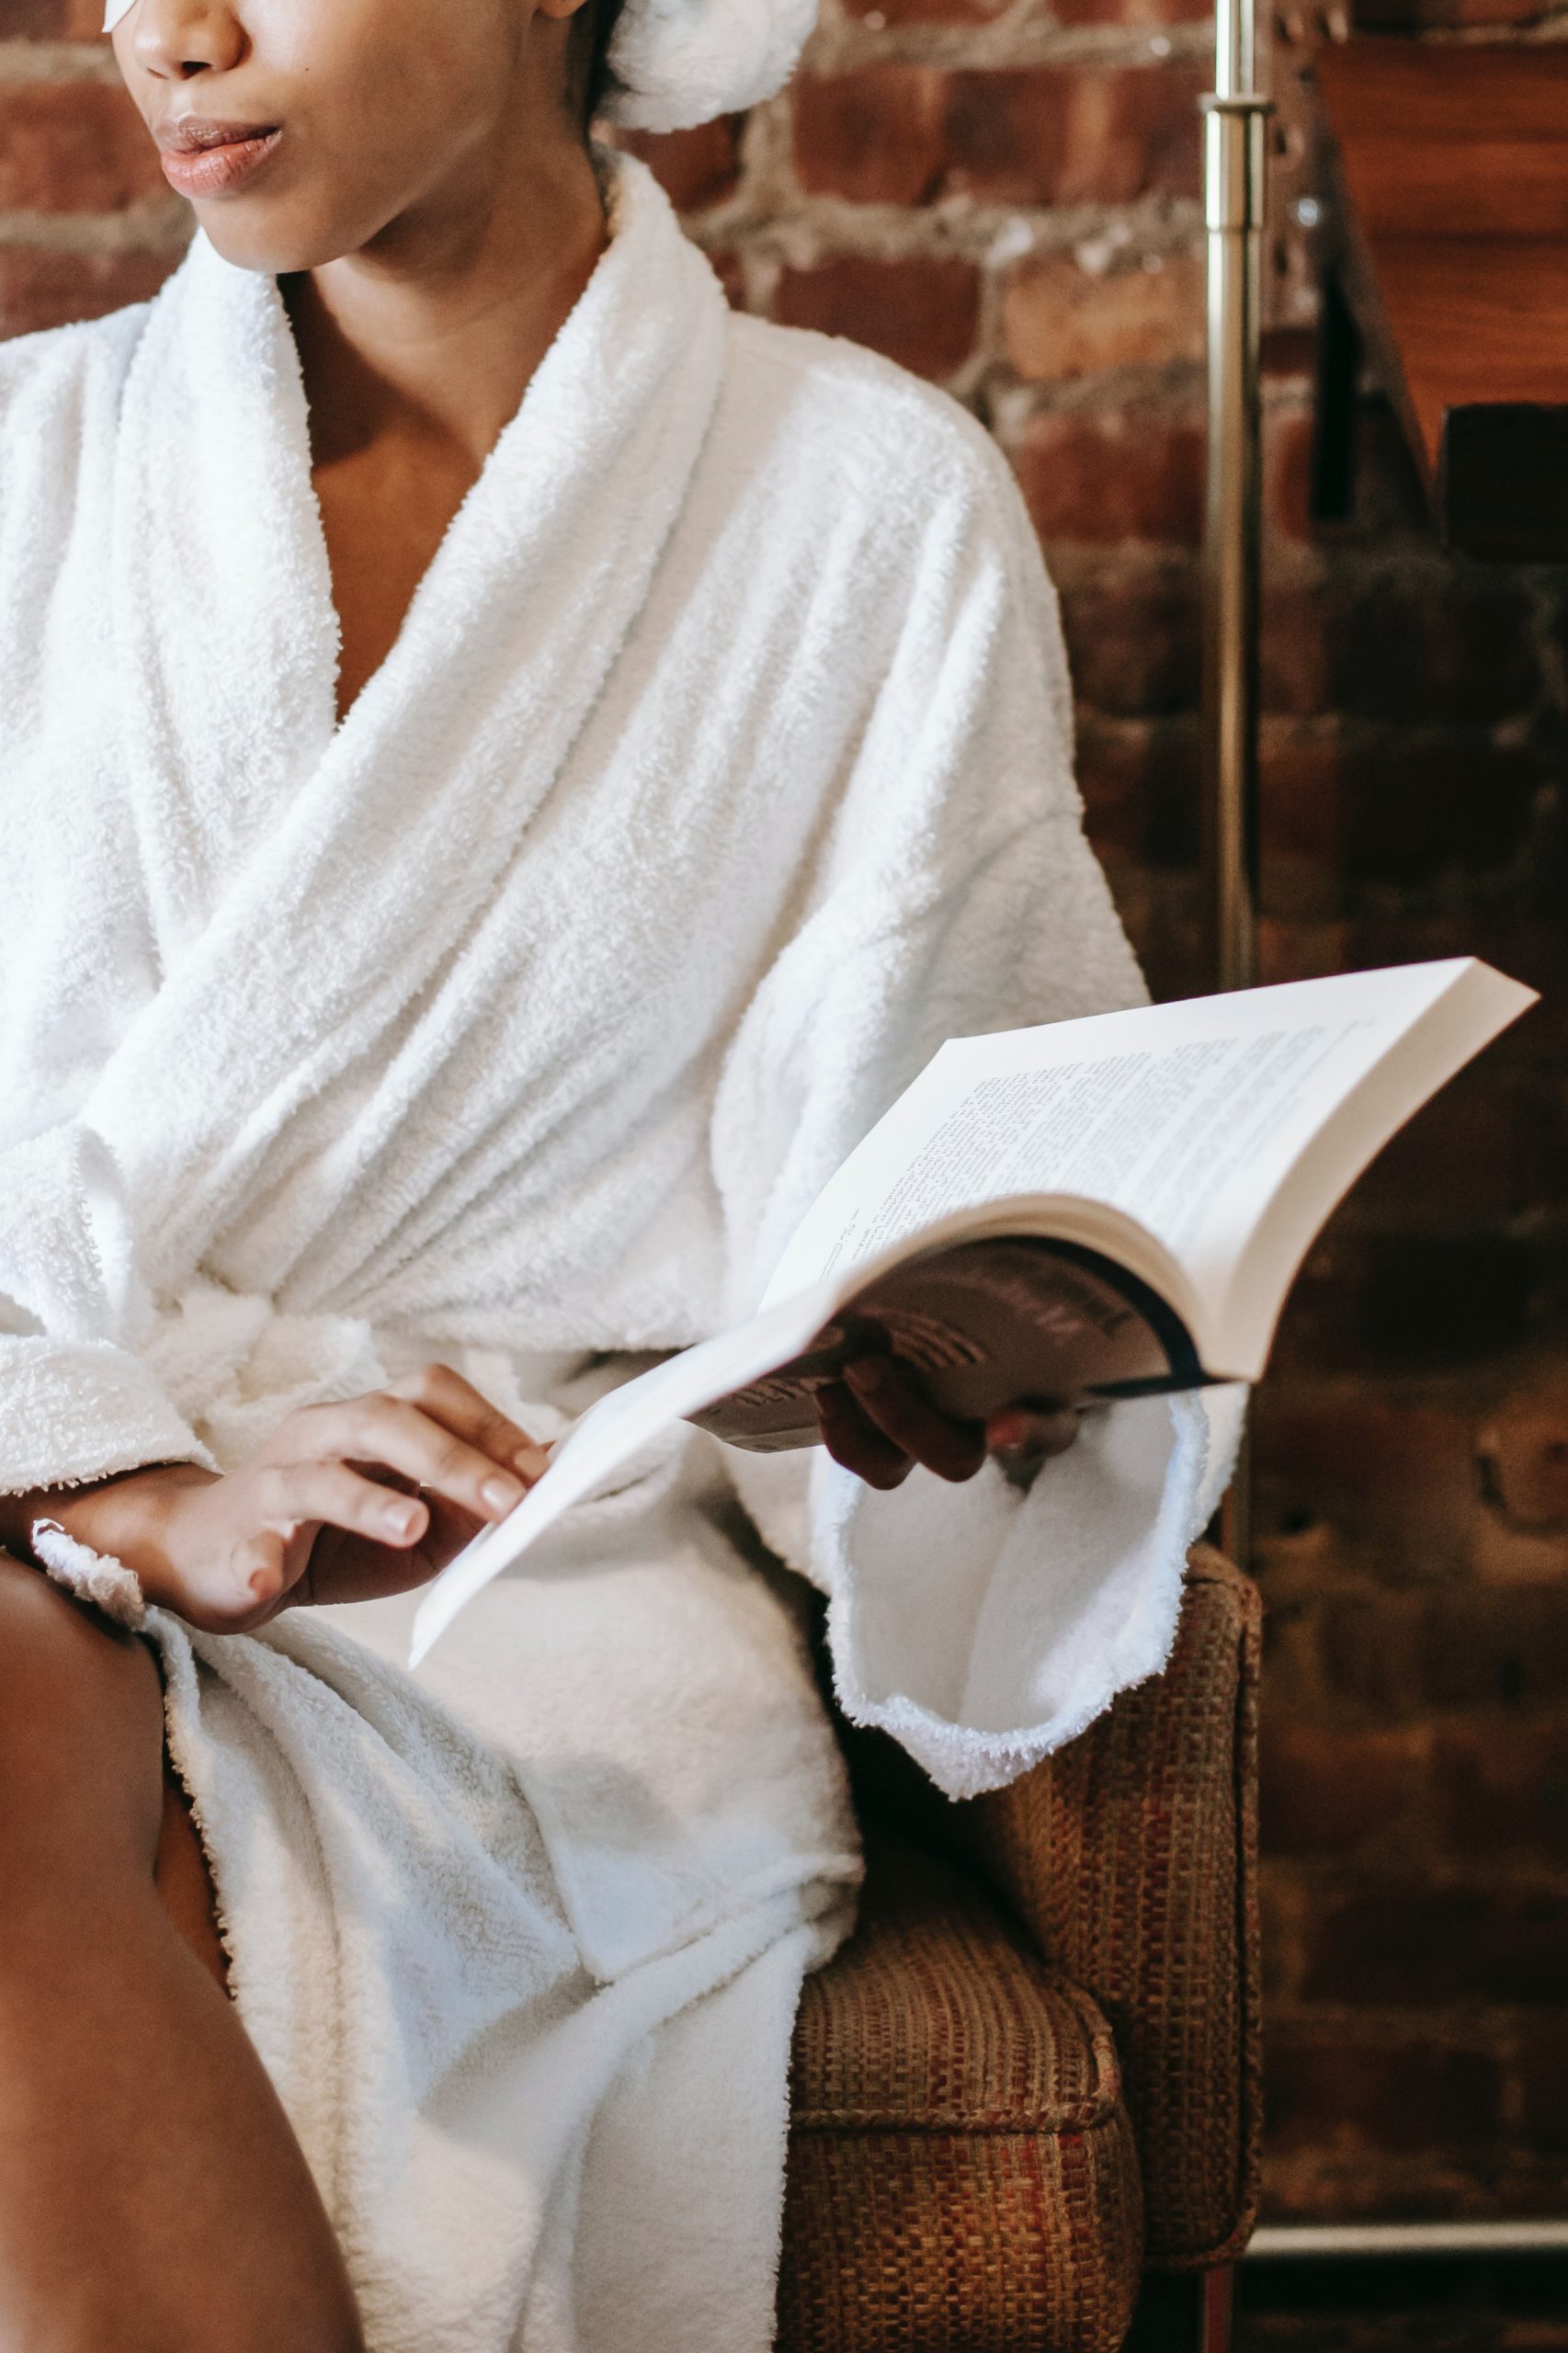 How To Have The Ultimate Spa Day At Home